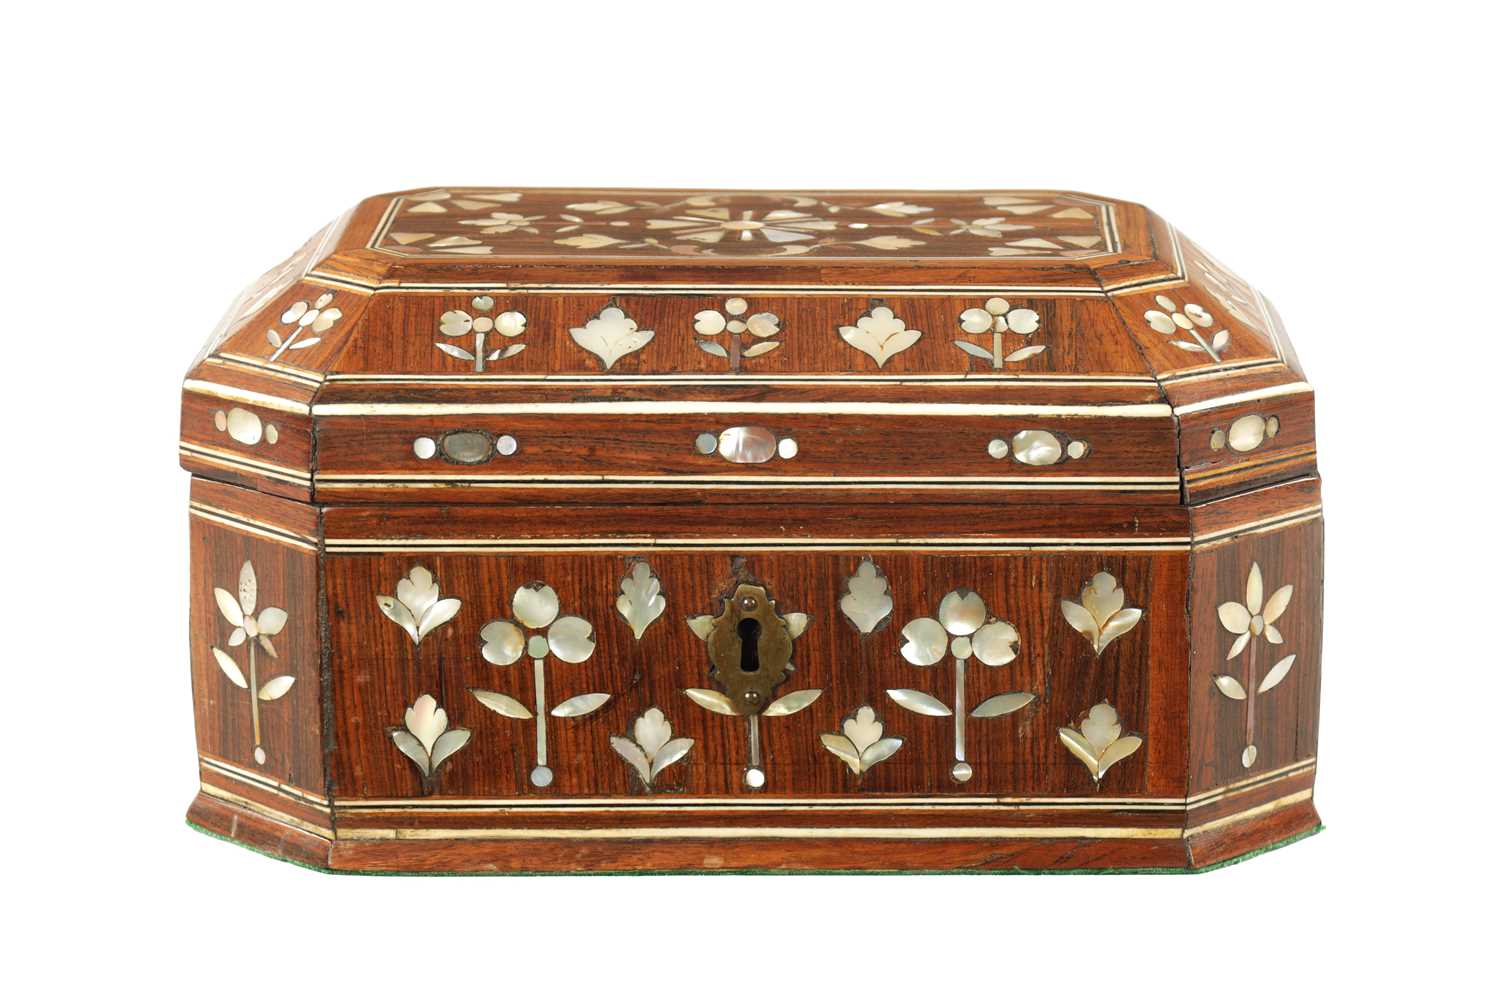 AN EARLY 18TH CENTURY SOUTH AMERICAN MOTHER OF PEARL INLAID BOX